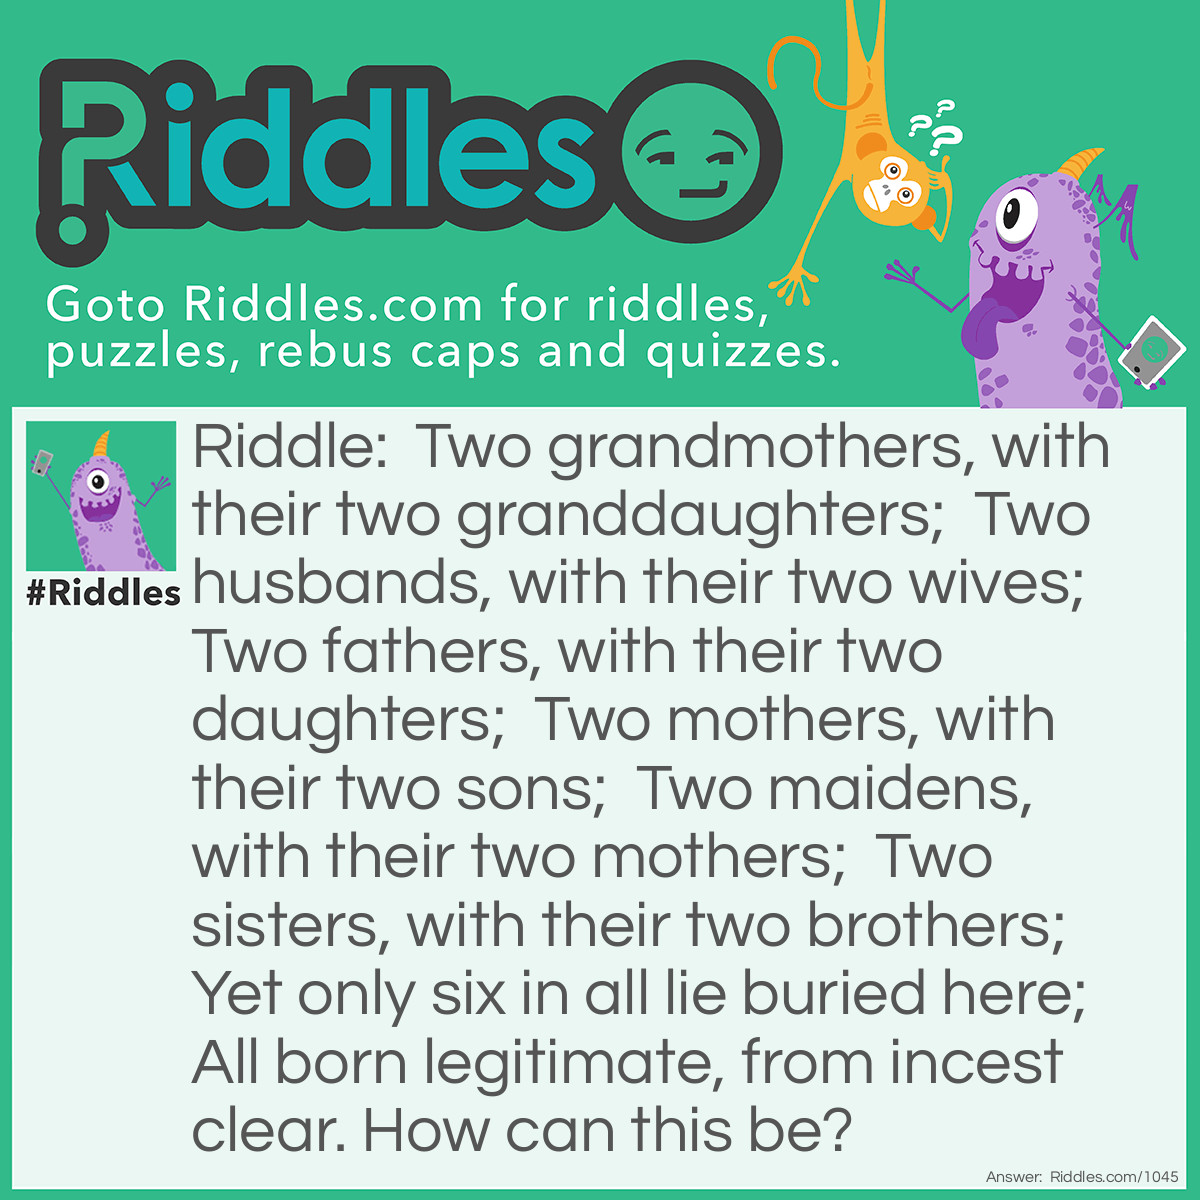 Riddle: Two grandmothers, with their two granddaughters;  Two husbands, with their two wives;  Two fathers, with their two daughters;  Two mothers, with their two sons;  Two maidens, with their two mothers;  Two sisters, with their two brothers;  Yet only six in all lie buried here;  All born legitimate, from incest clear. How can this be? Answer: Two widows each had a son, and each widow married the son of the other and then each had a daughter.